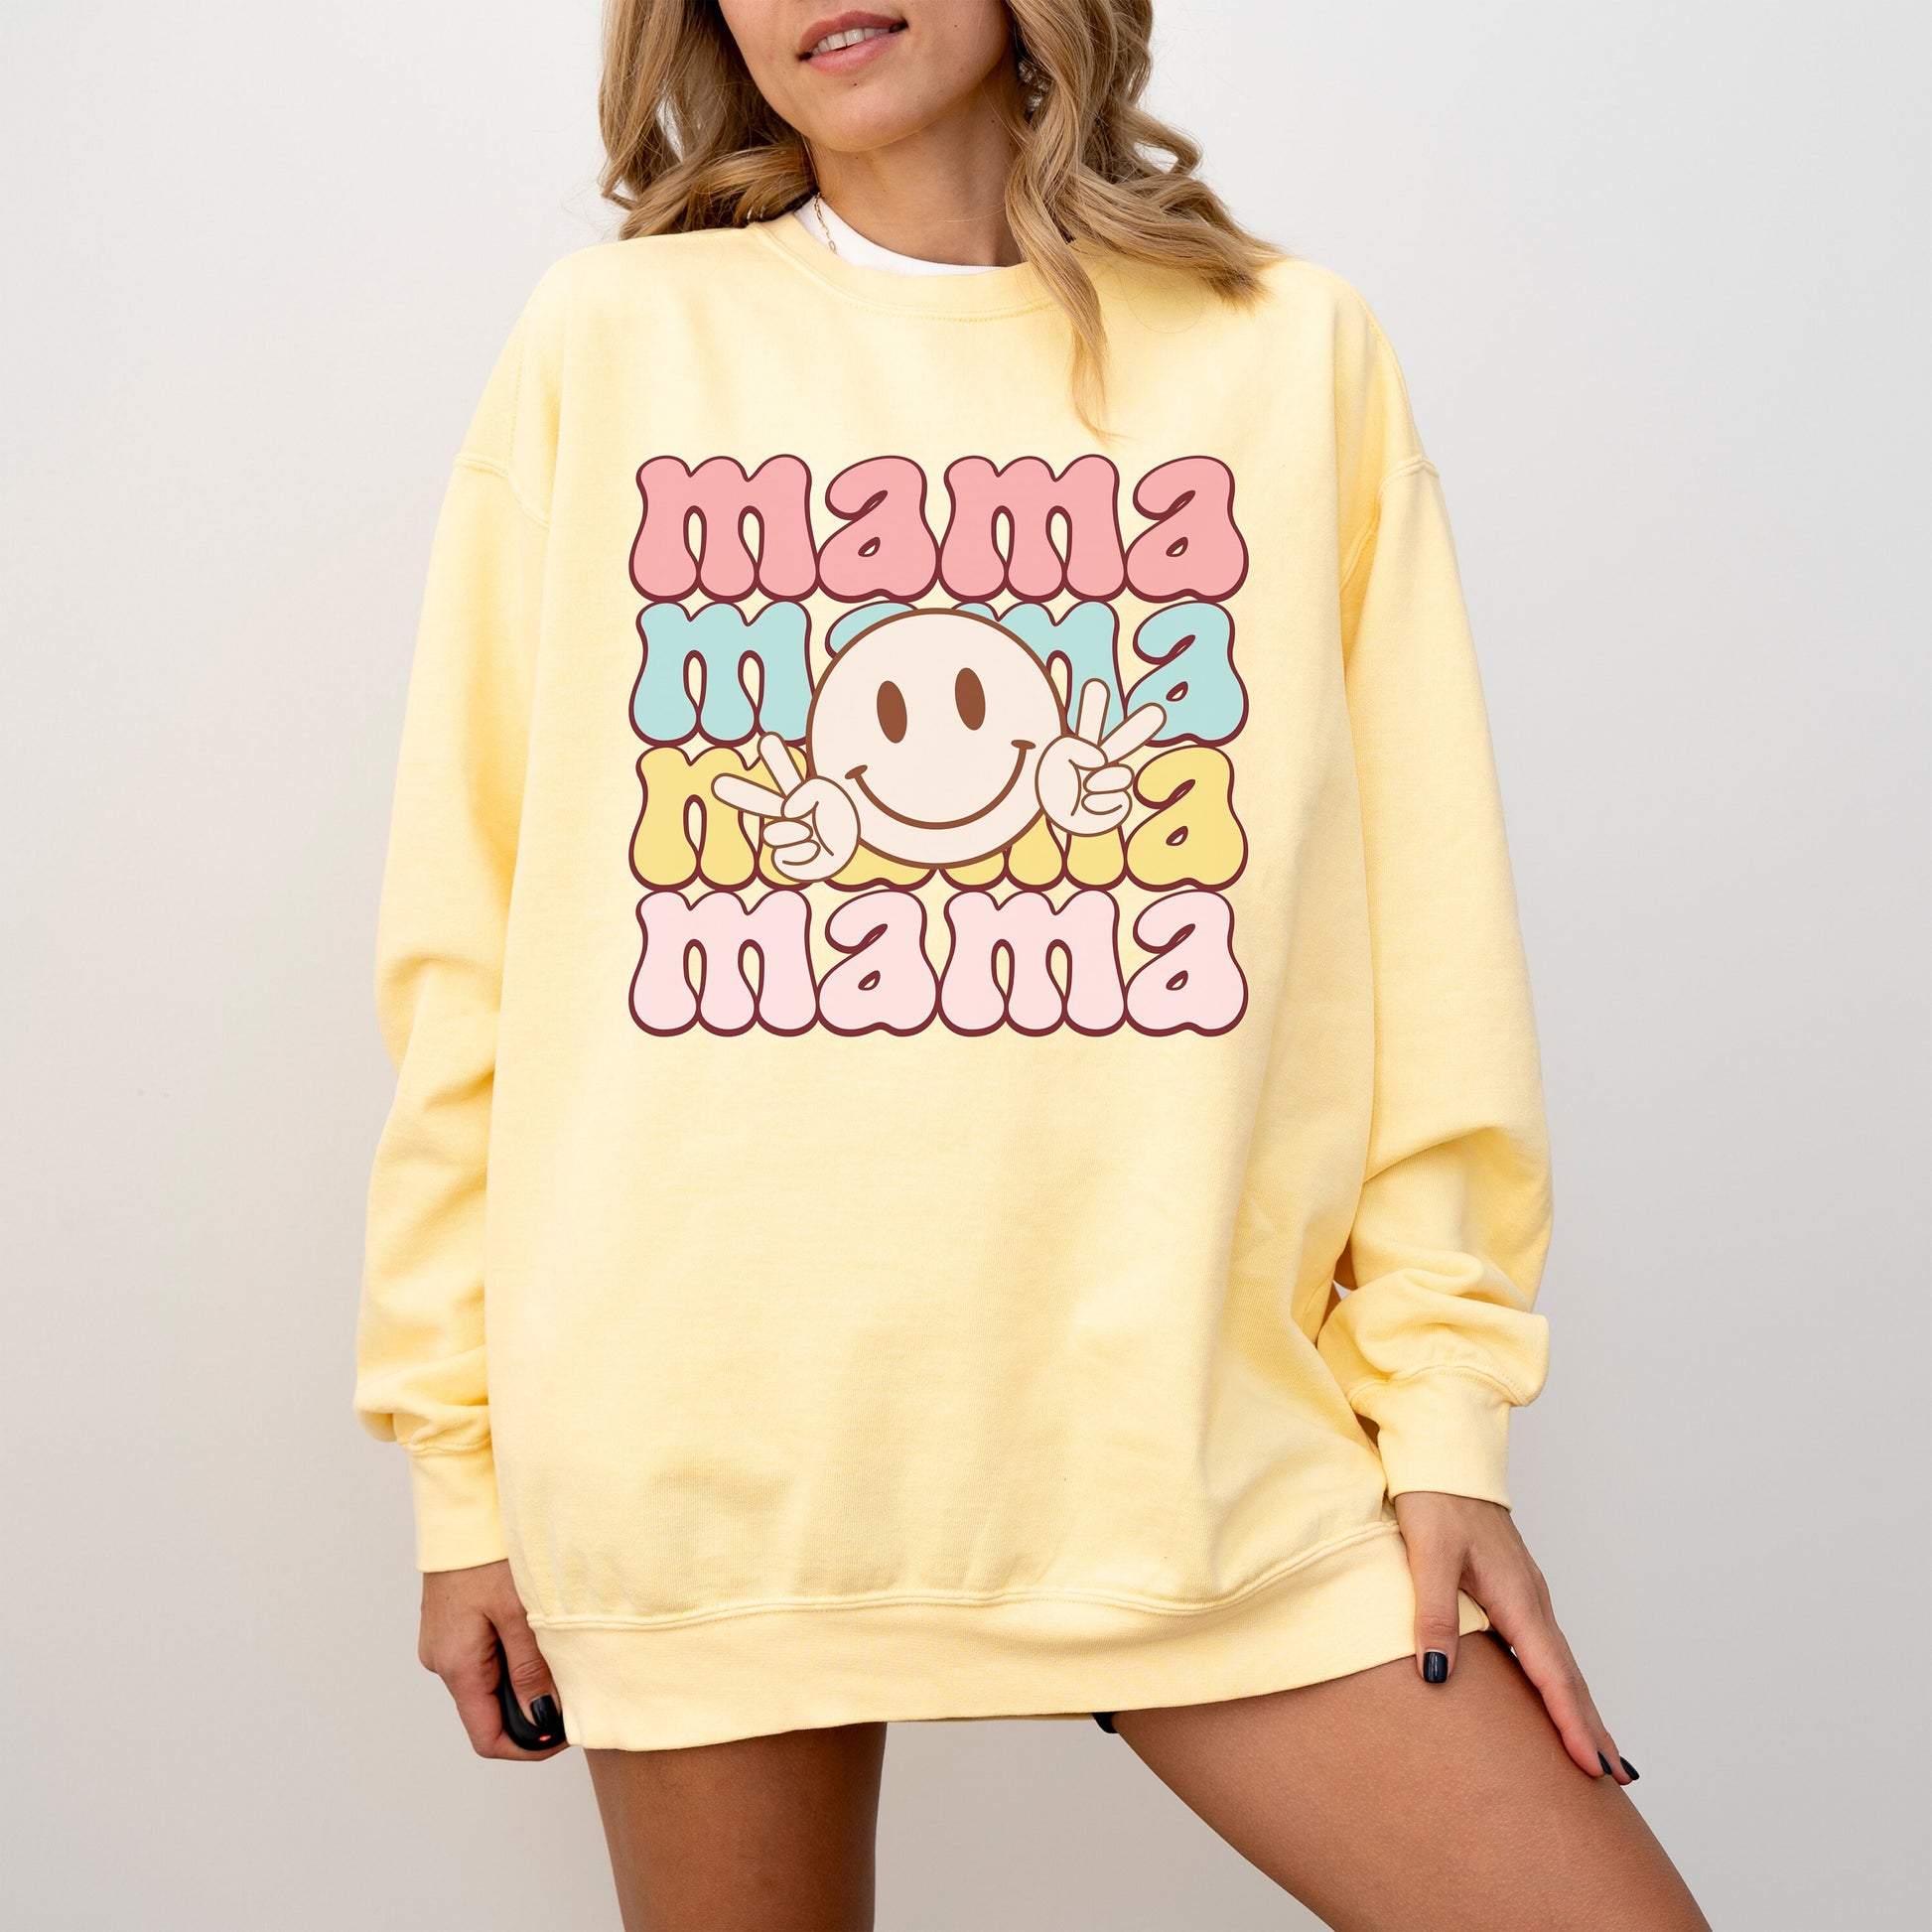 Mama Sweatshirt, Happy Mama Sweatshirt, Mothers Day Gift, Cool Mom, First Mothers Day Gift, Personalized Gift, Mom Life Shirt, New Mom Gift